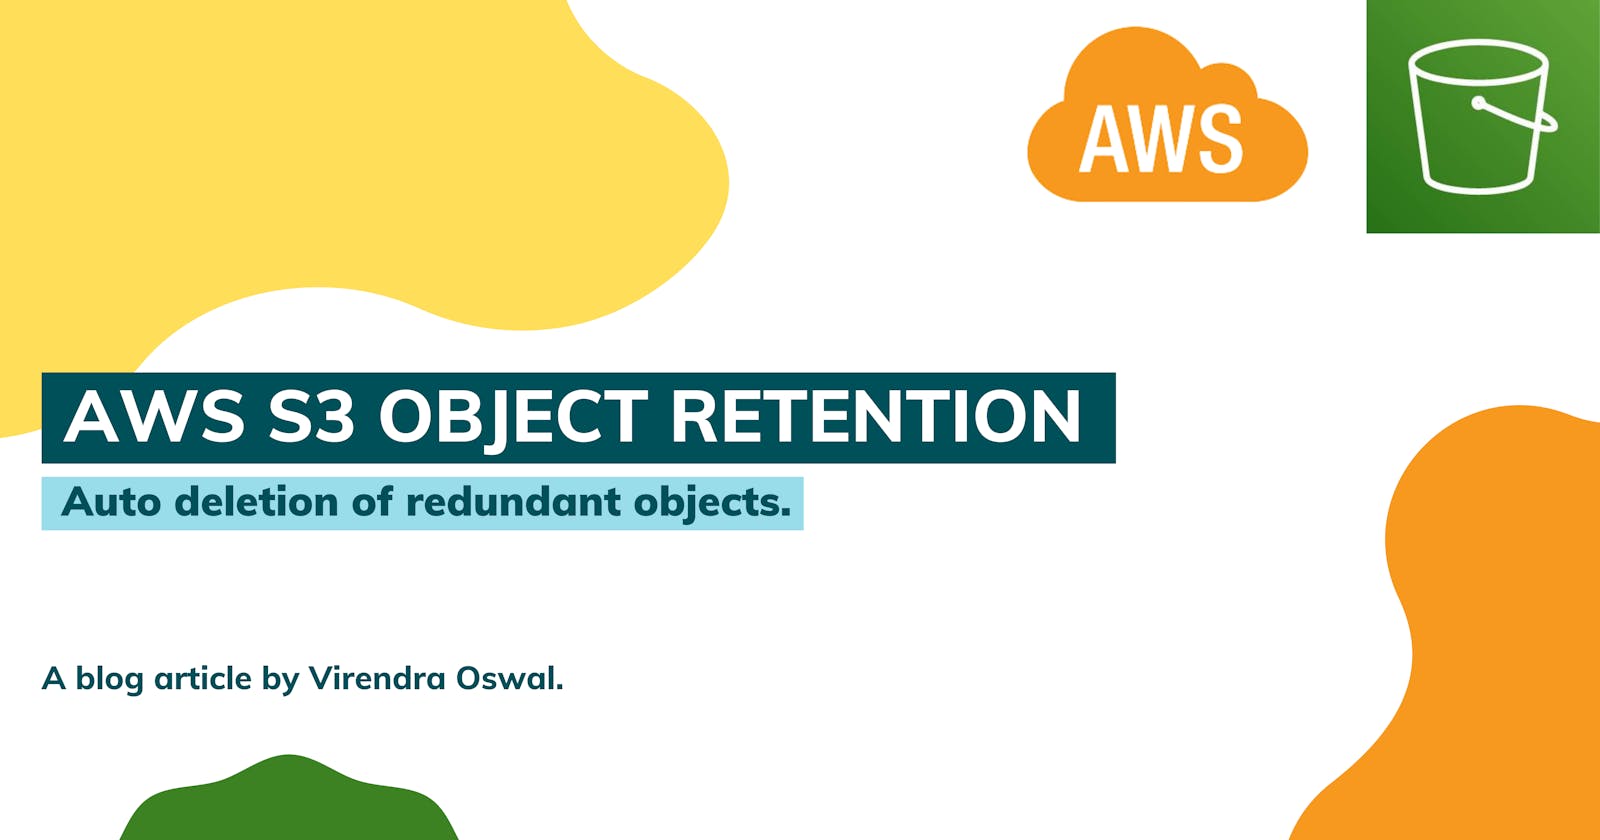 AWS S3 - Object Retention is a key.